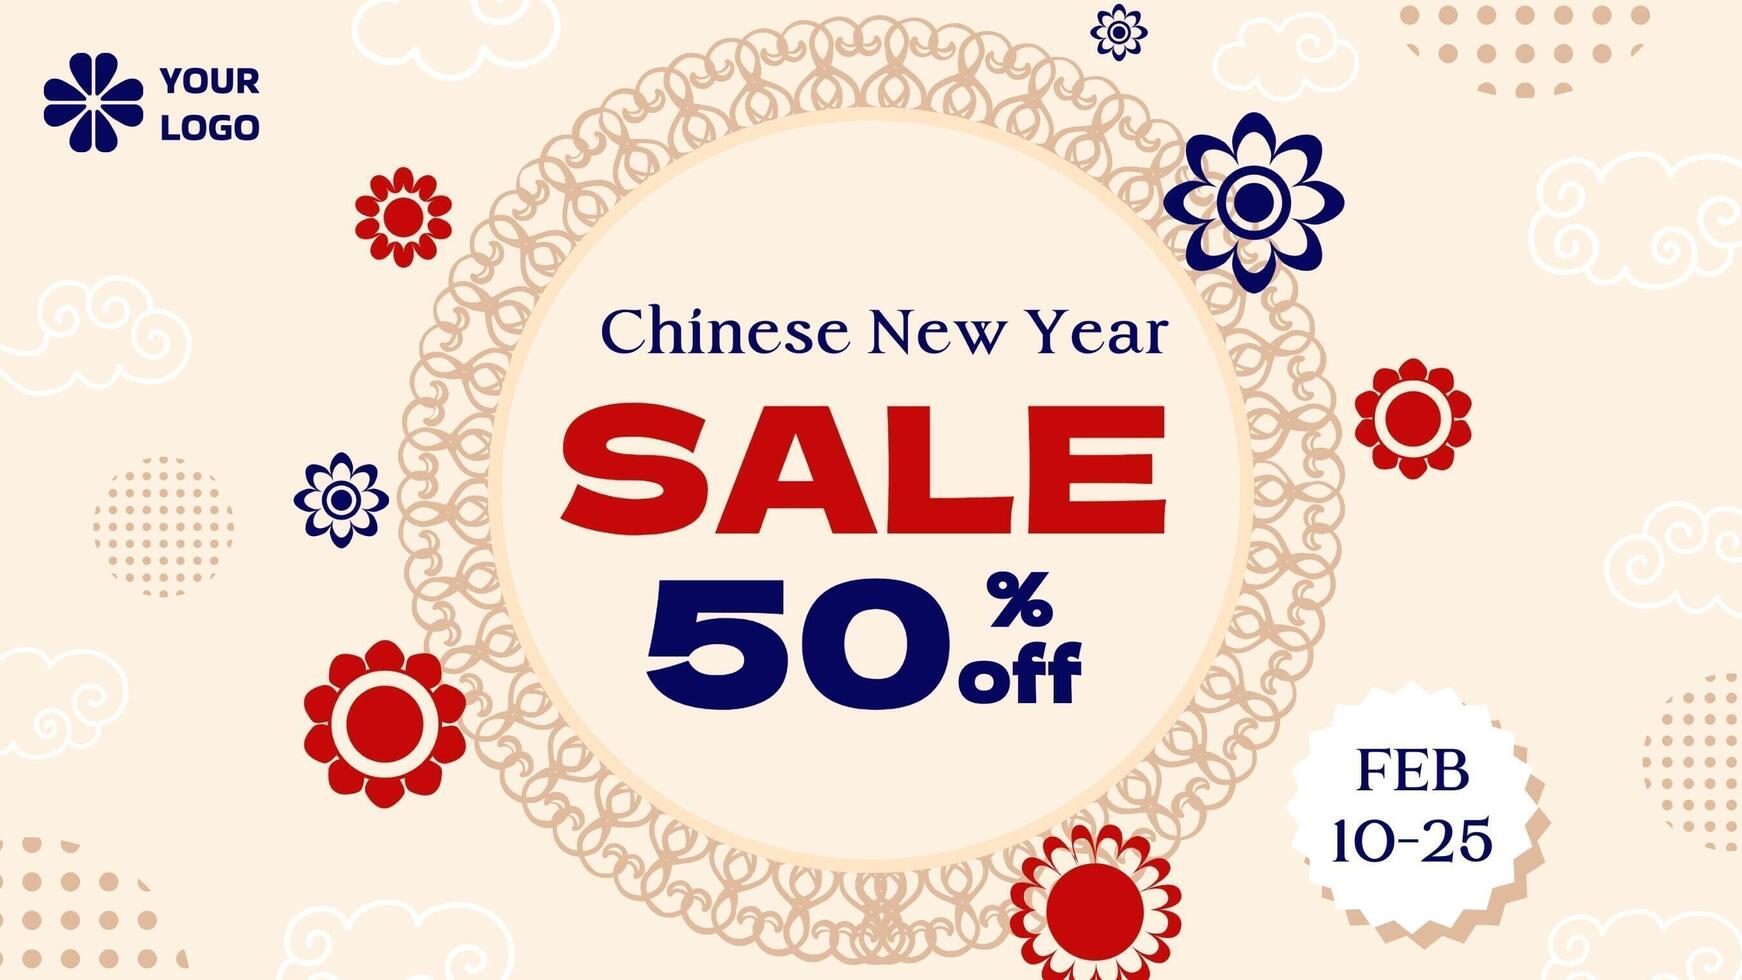 Chinese New Year Sale Twitter Post template